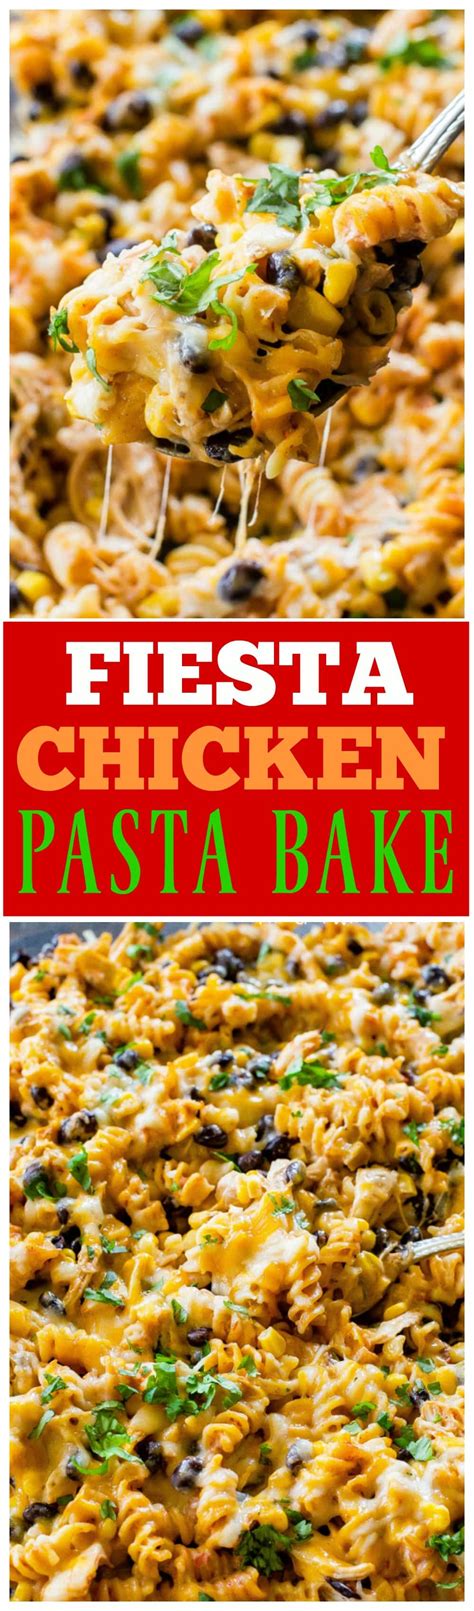 fiesta-chicken-pasta-bake-the-girl-who-ate-everything image